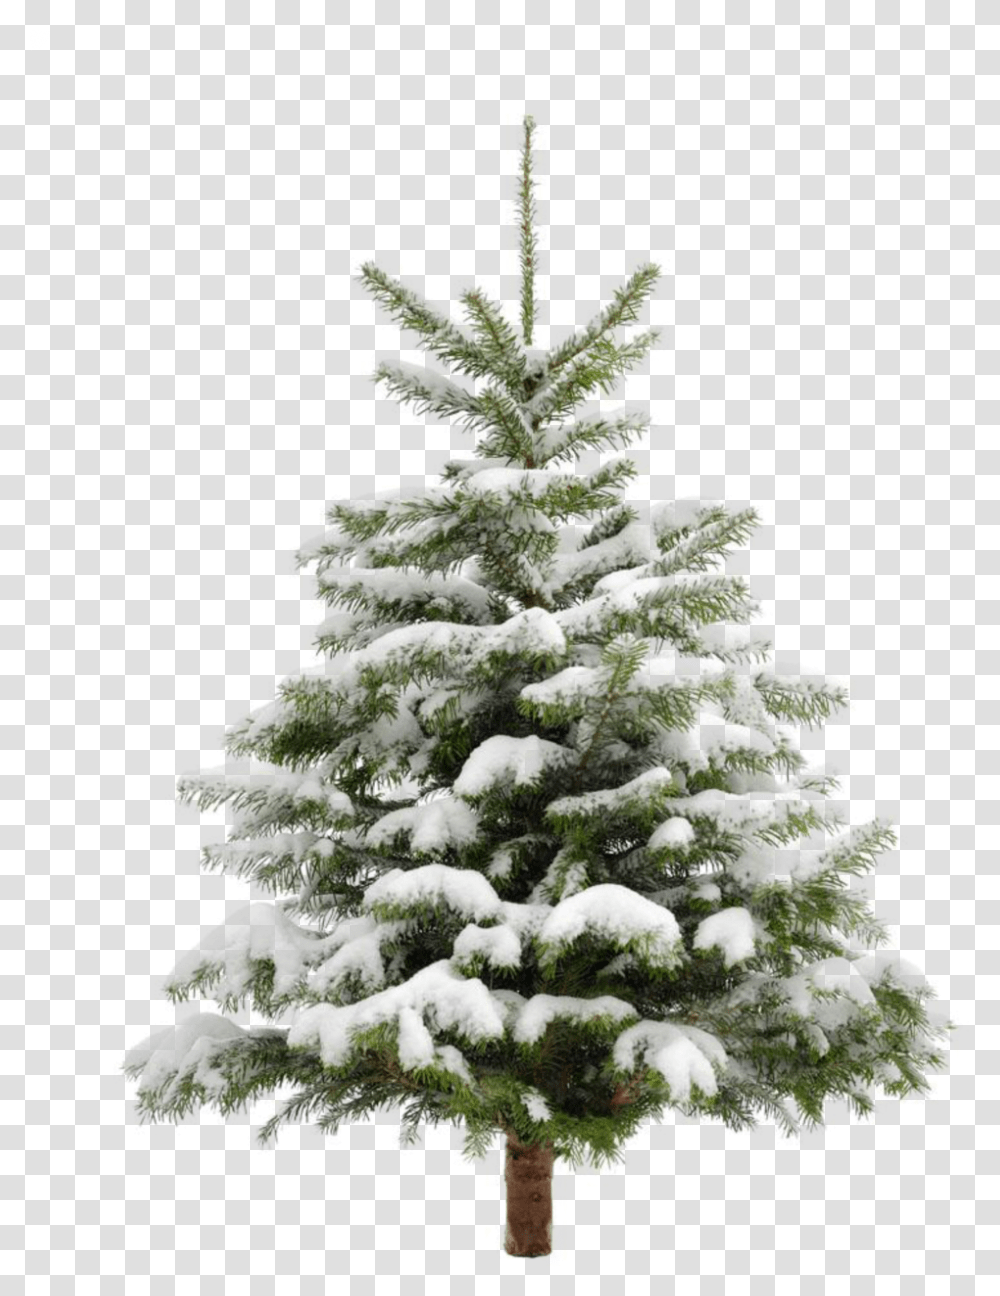 Ftestickers Winter Snow Landscape Tree Pine Pine Tree With Snow, Plant, Christmas Tree, Ornament, Fir Transparent Png